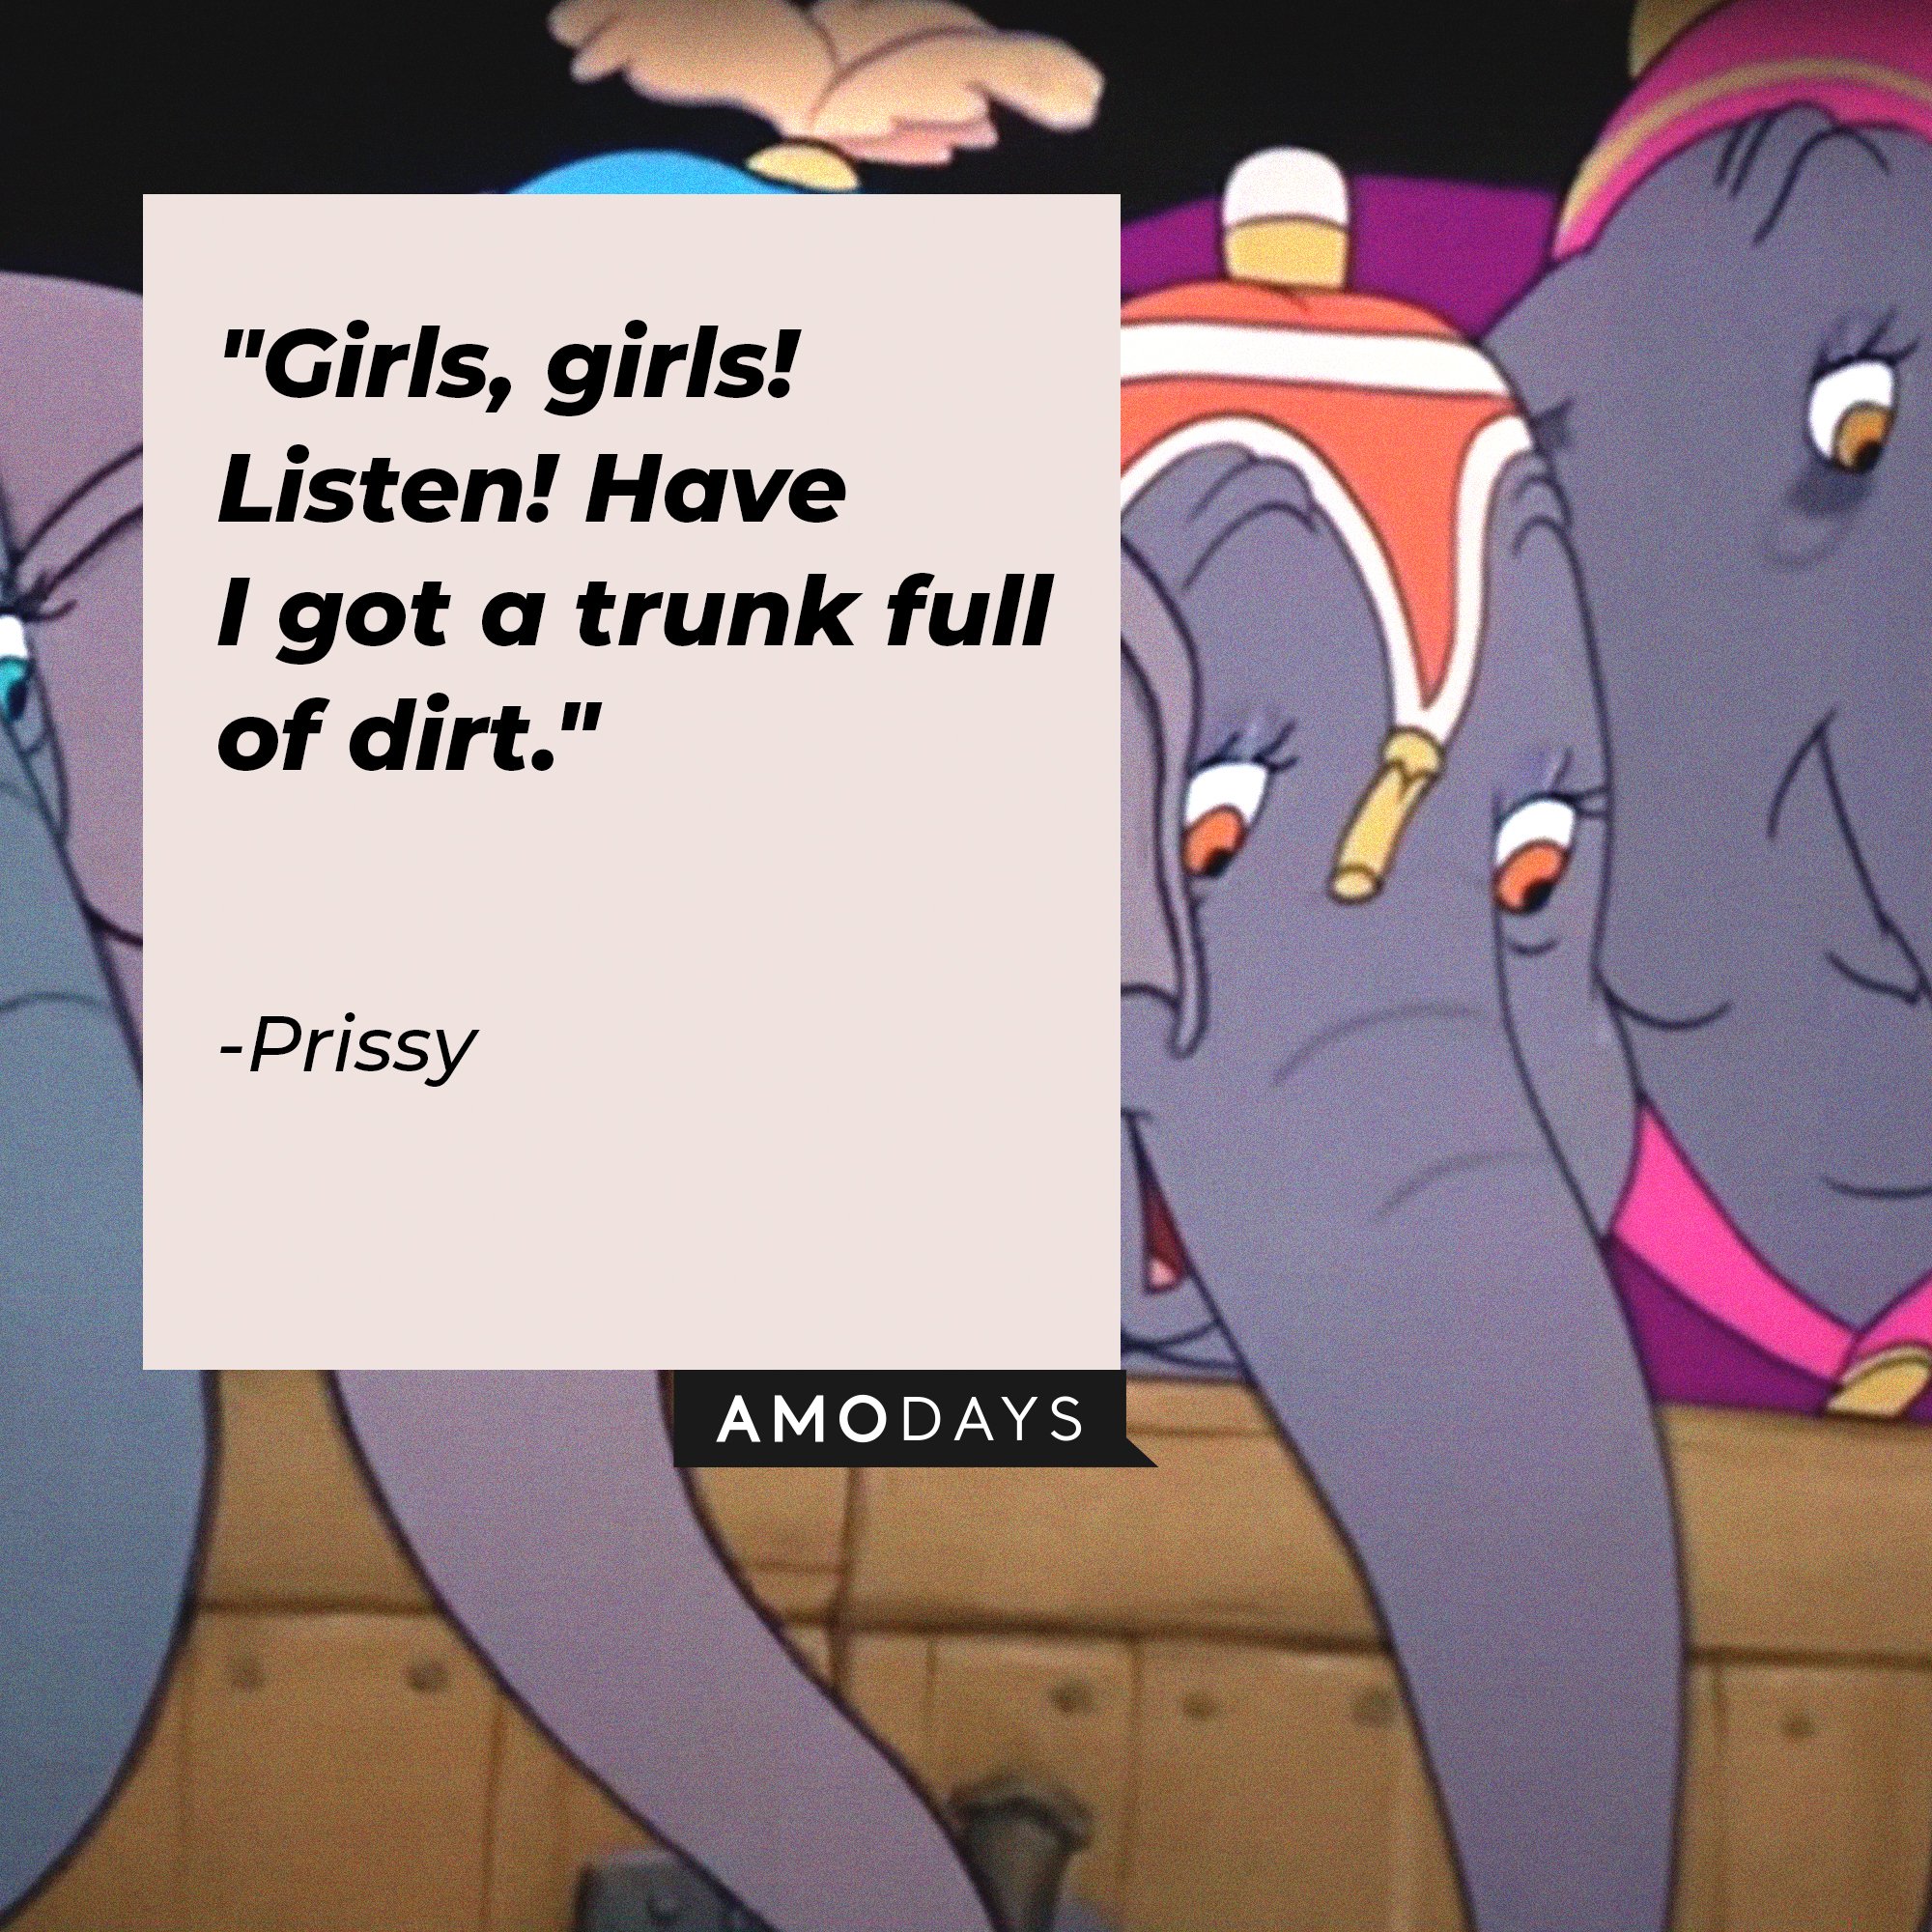  Prissy’s quote: "Girls, girls! Listen! Have I got a trunk full of dirt.” | Image: AmoDays